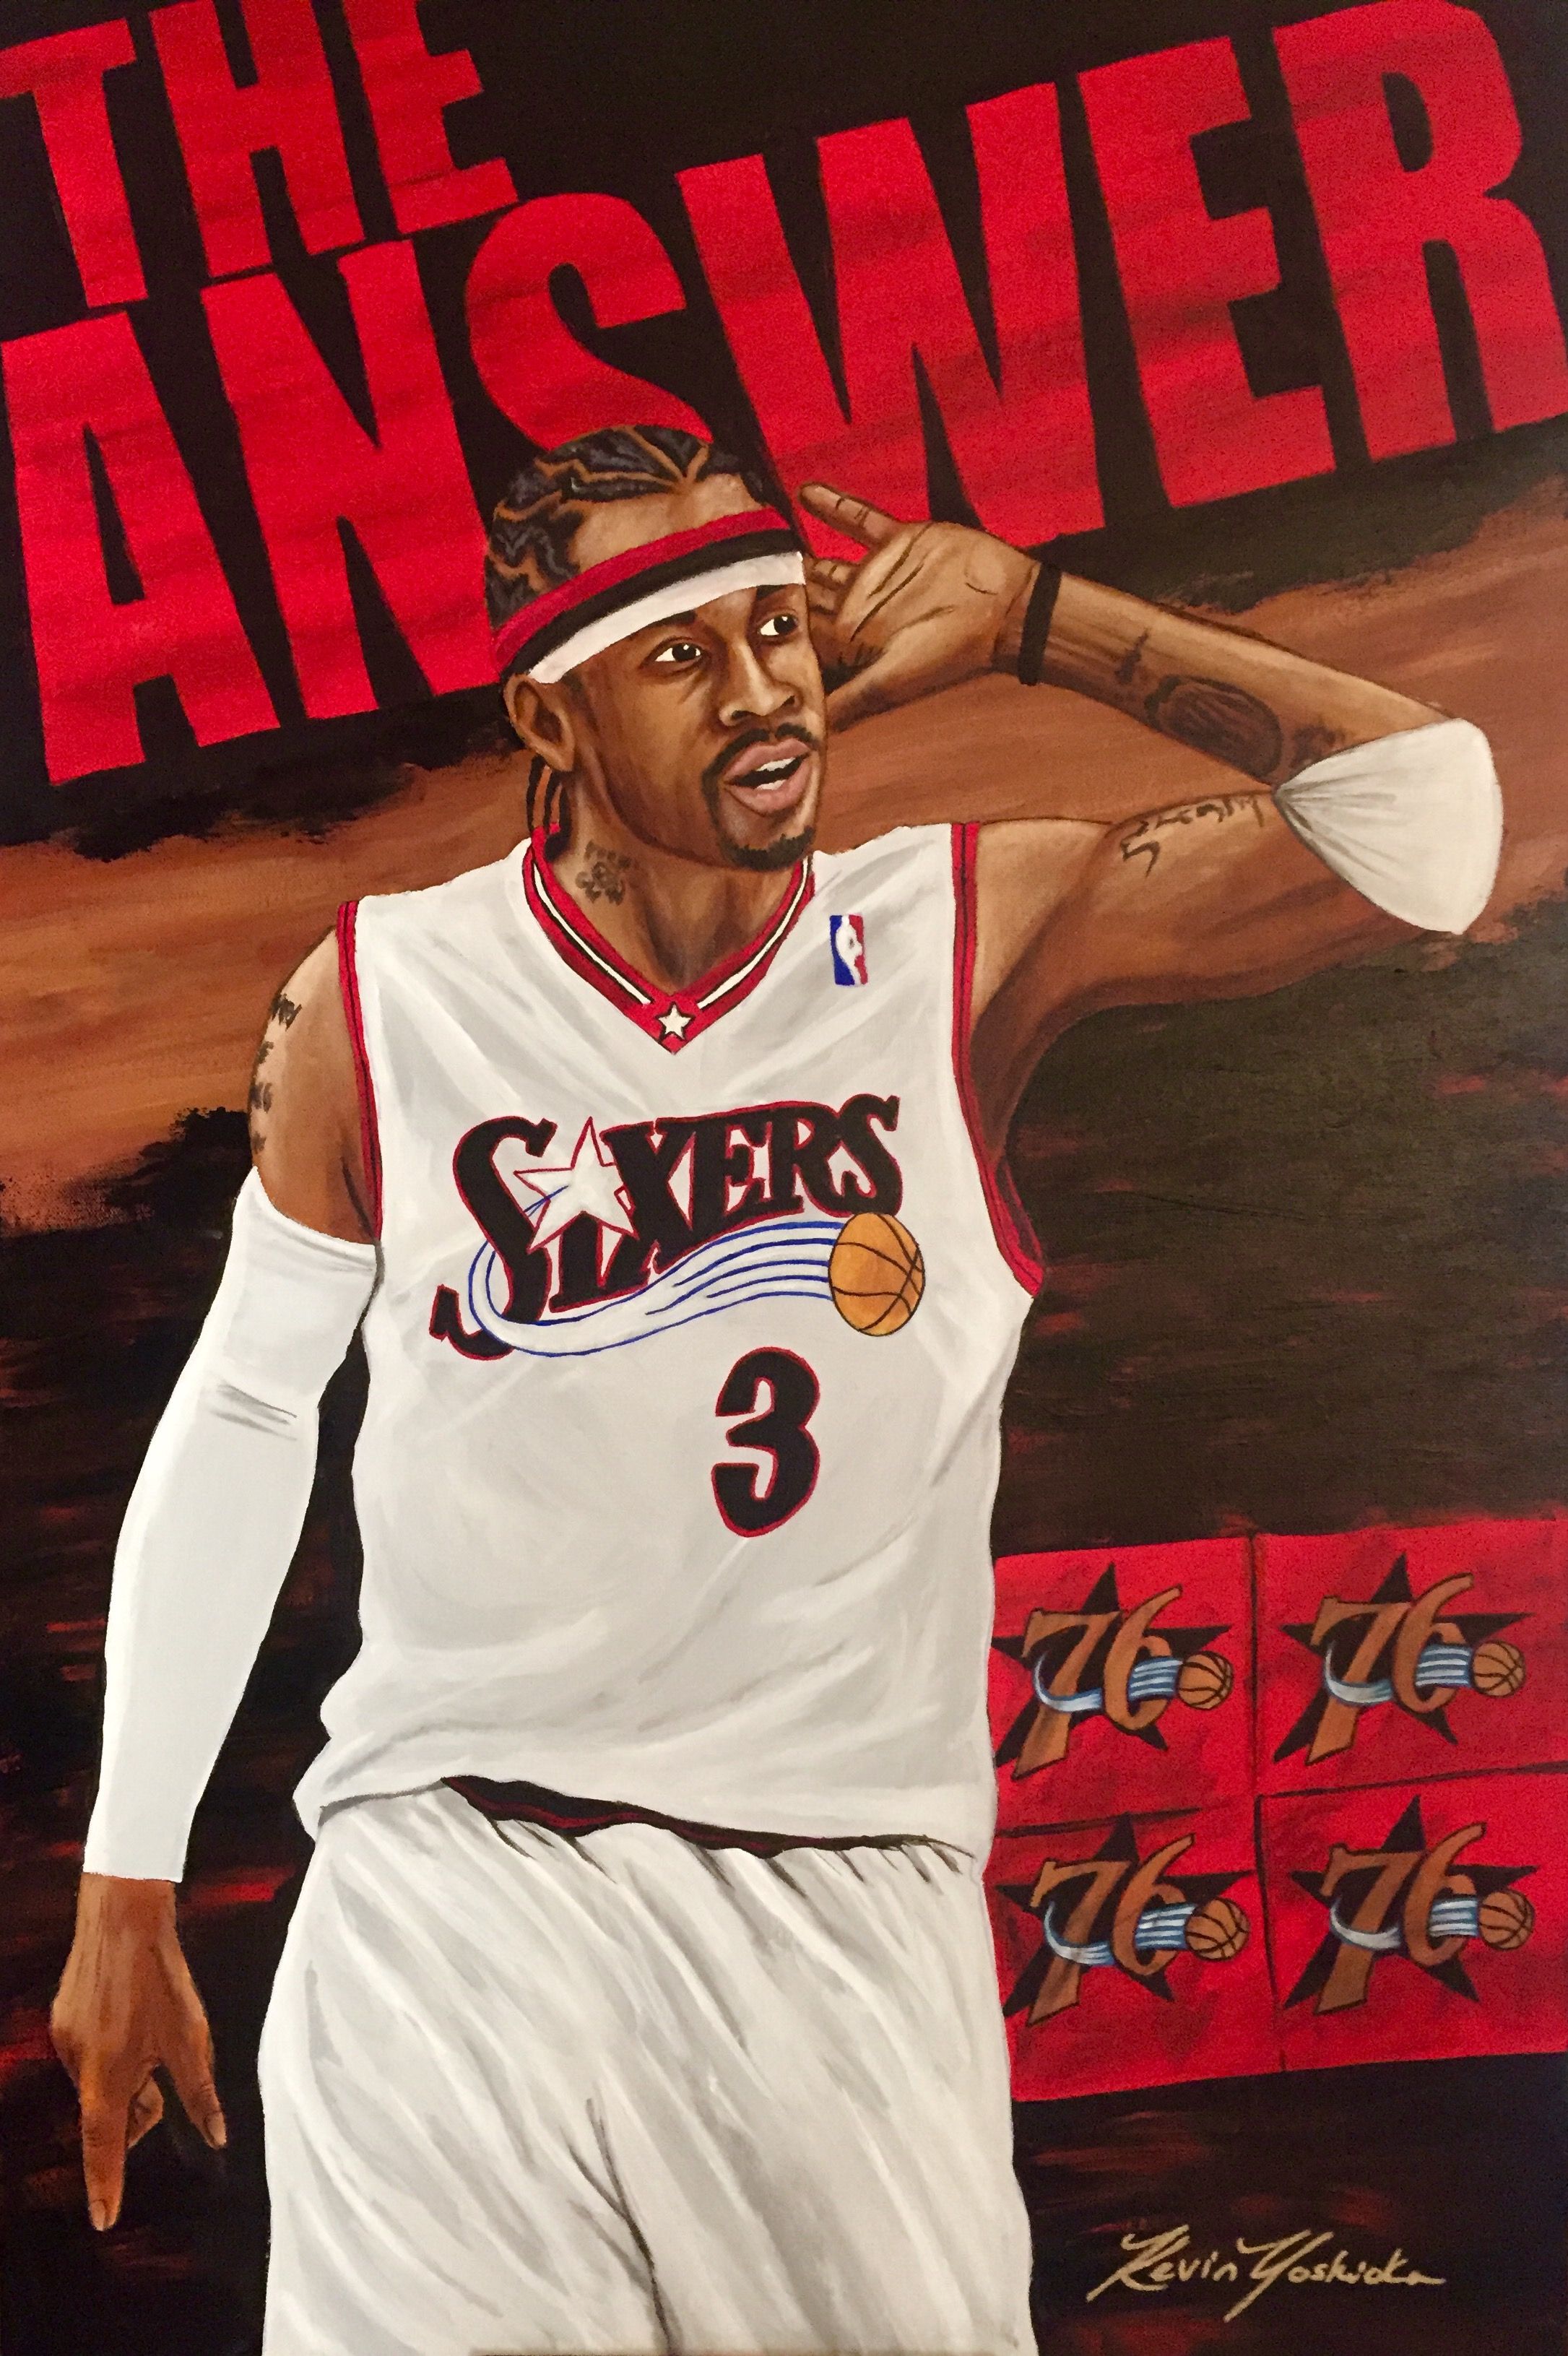 Allen Iverson By Whatevah32 Iverson iPhone 7 HD Wallpaper